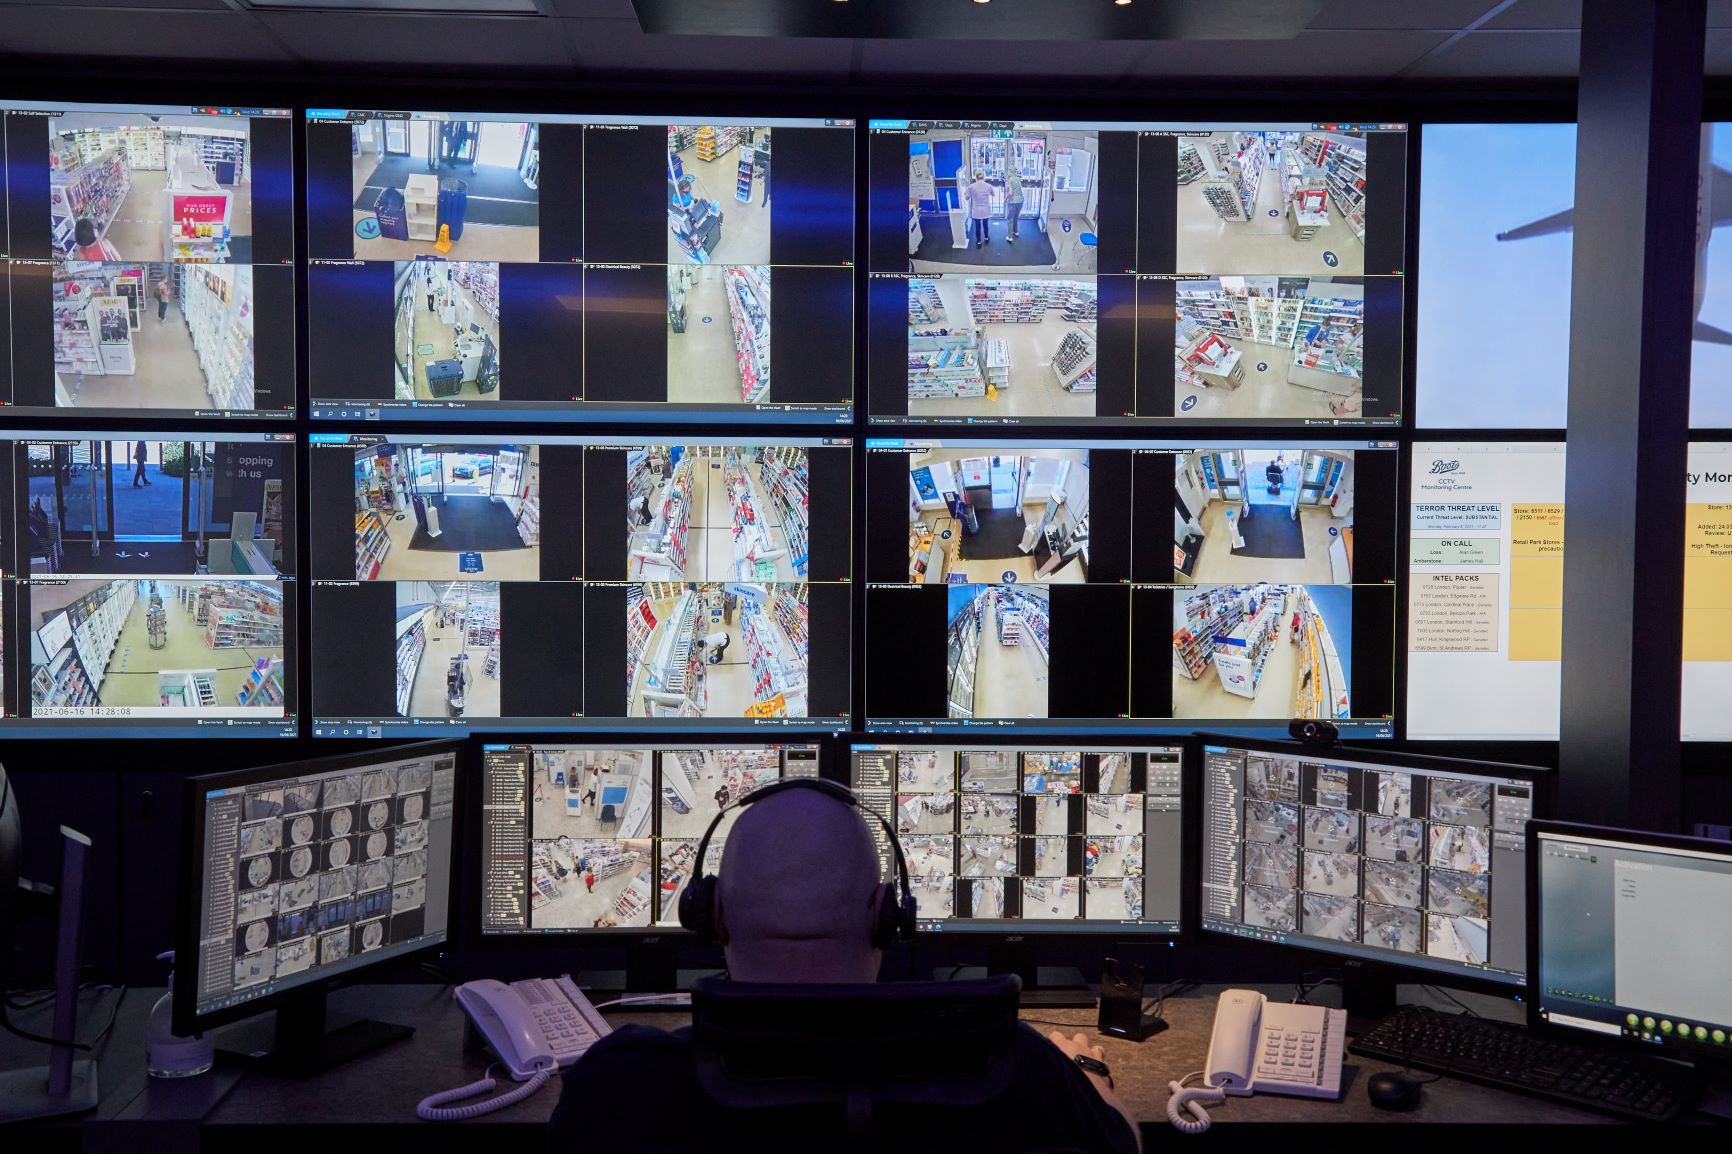 Boots CCTV Monitoring Centre features 18 screens along an 11-metre wall that can display live CCTV feeds from over 1,000 Boots stores across the UK